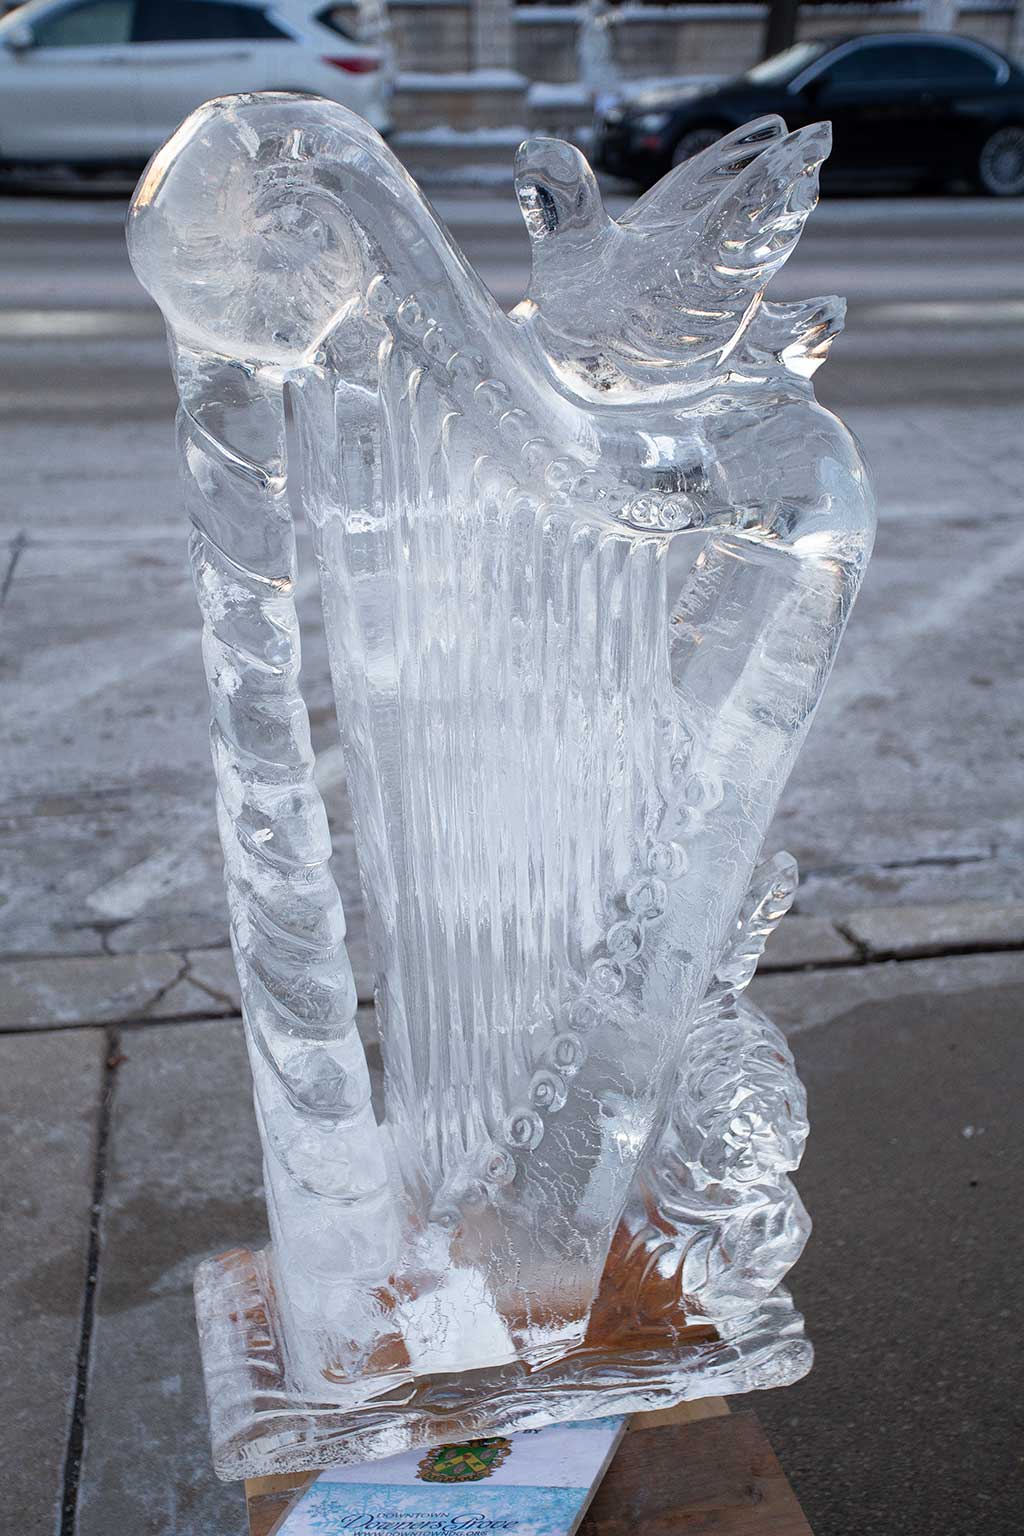 drive-swim-fly-downers-grove-chicago-illinois-ice-sculpture-downtown-businesses-harp-dove